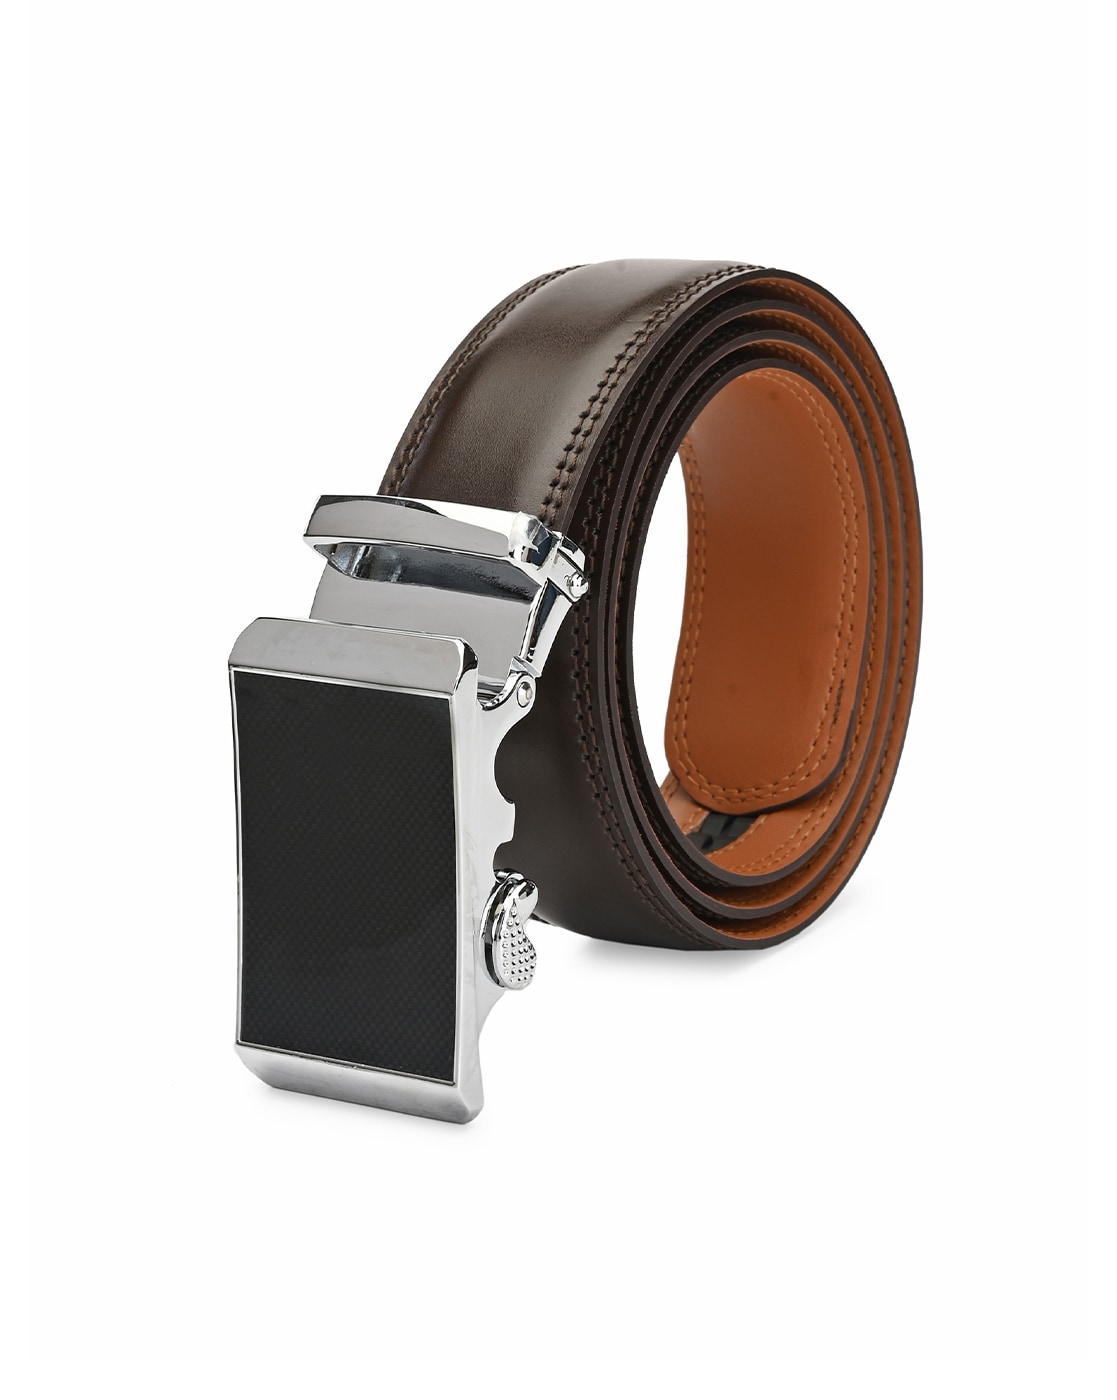 PACIFIC GOLD Reversible Belt with Pin-Buckle Closure For Men (Black, 50)